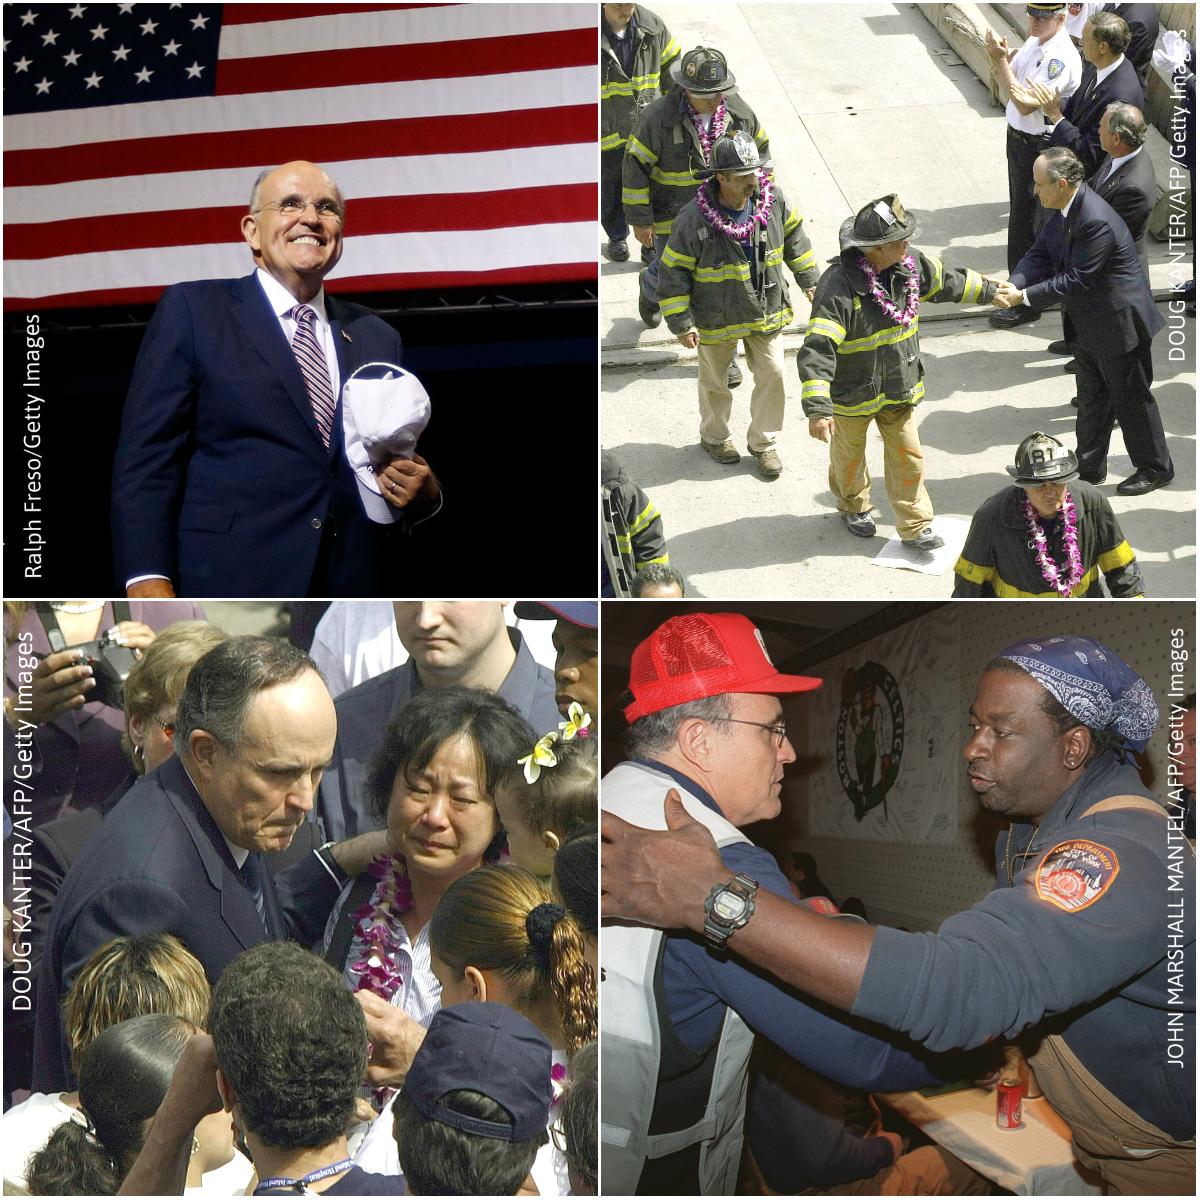 Rudy Giuliani arrives at a campaign rally for then-Republican presidential candidate Donald Trump on Aug. 31, 2016, in Phoenix, Arizona (Top Left), and as New York City's Mayor, greeting New Yorkers and emergency service personnel near the site of the World Trade Center disaster in 2001. (Getty Images)